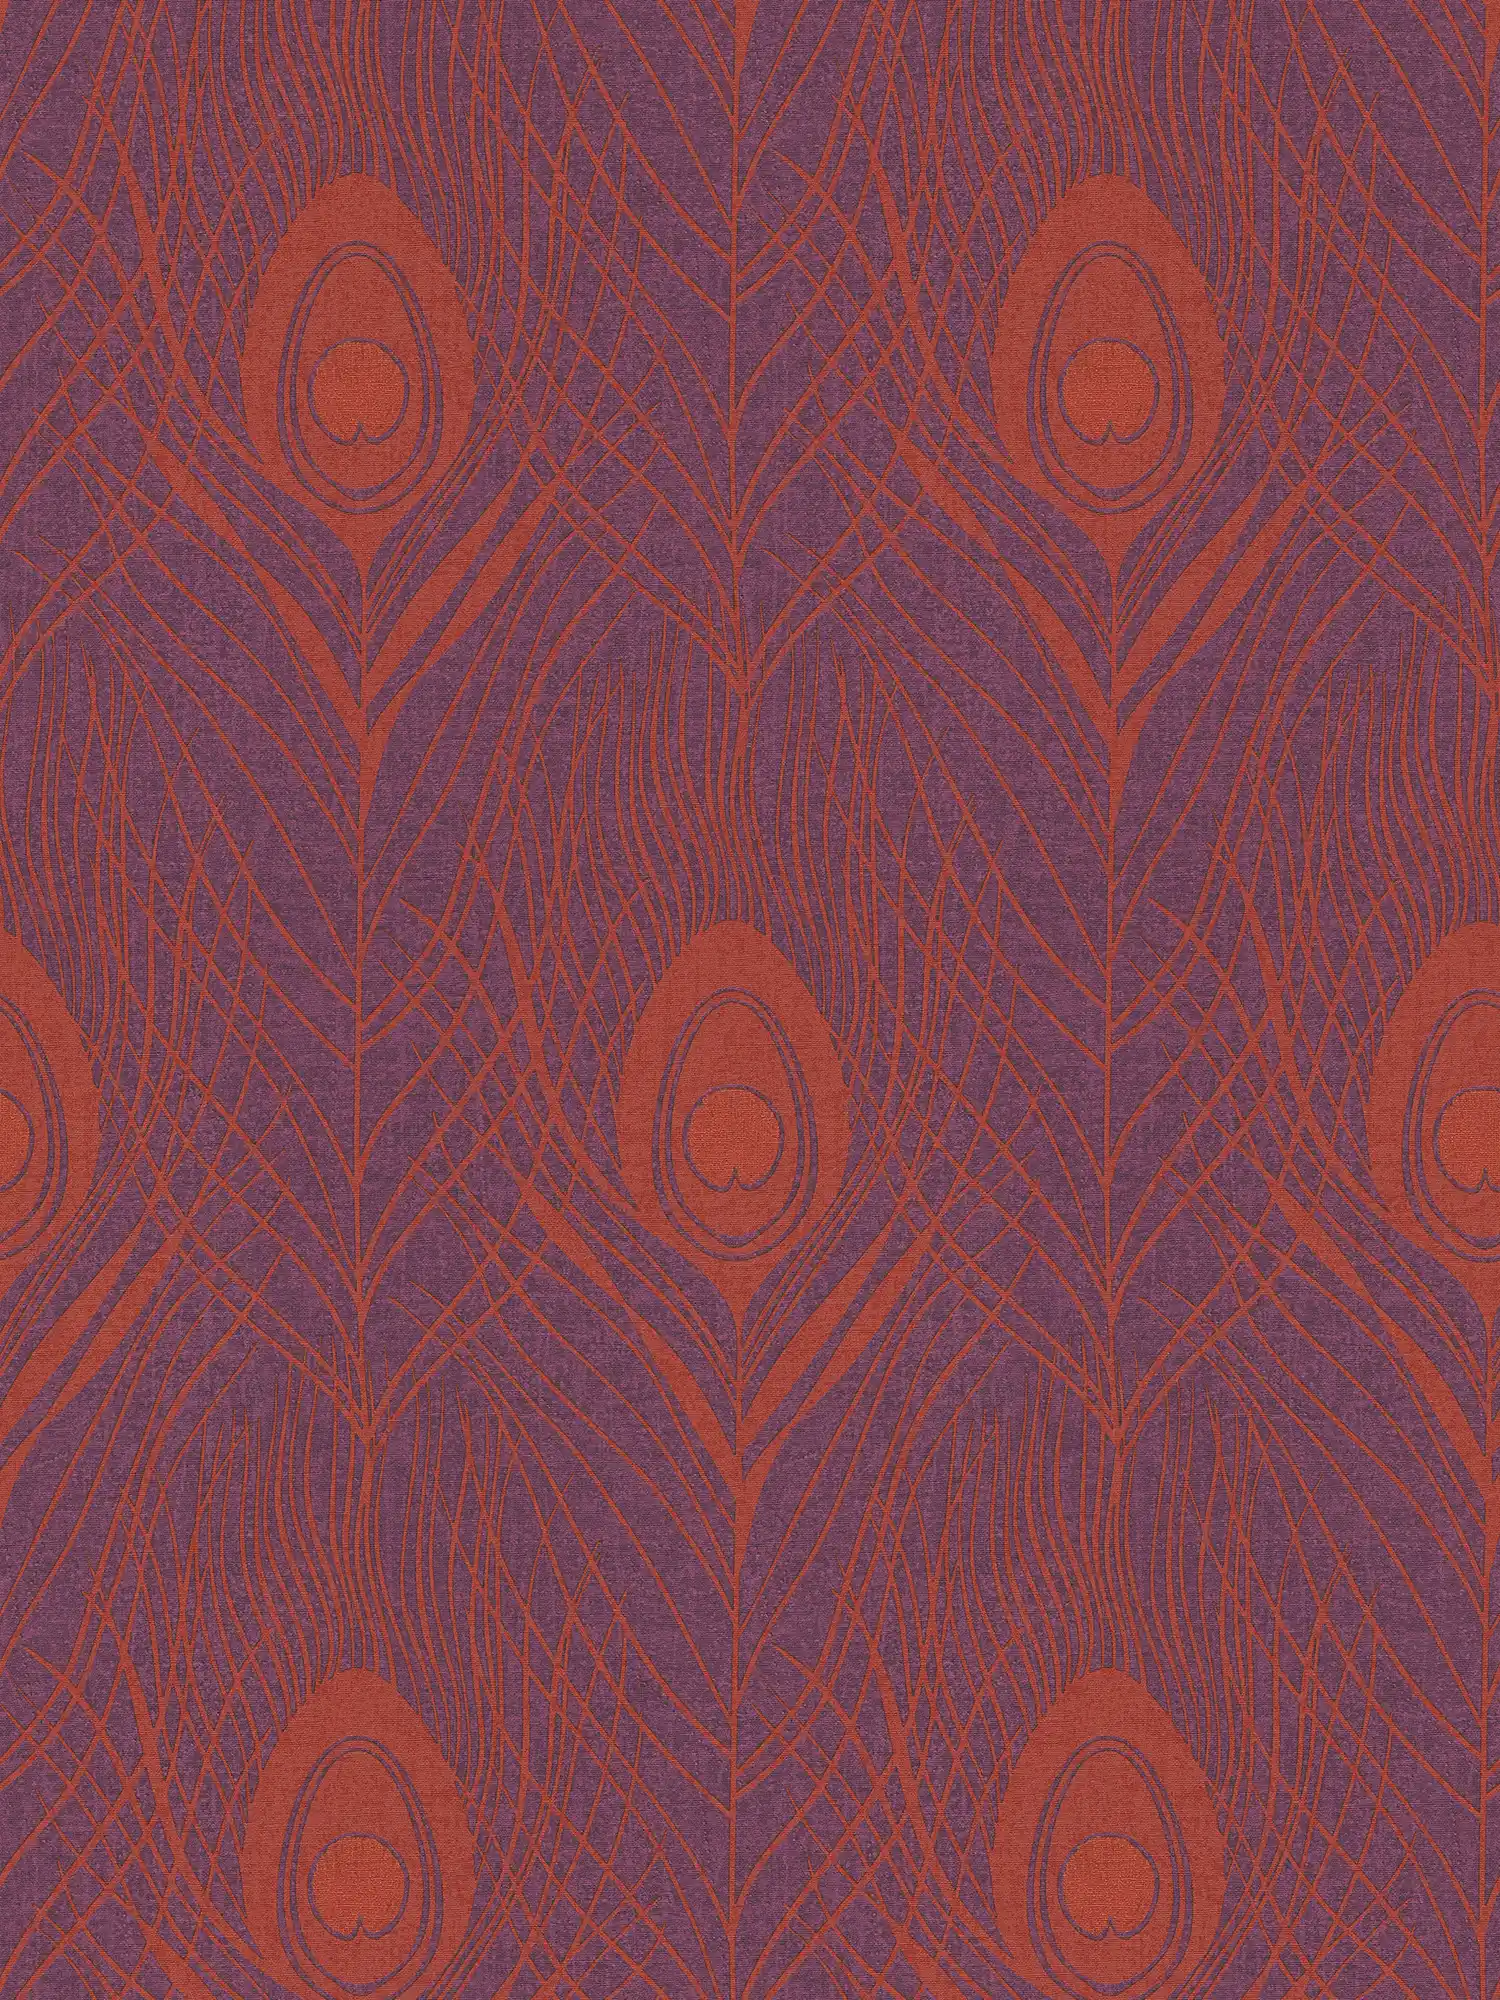 Magenta non-woven wallpaper with peacock feathers - red, purple, gold
